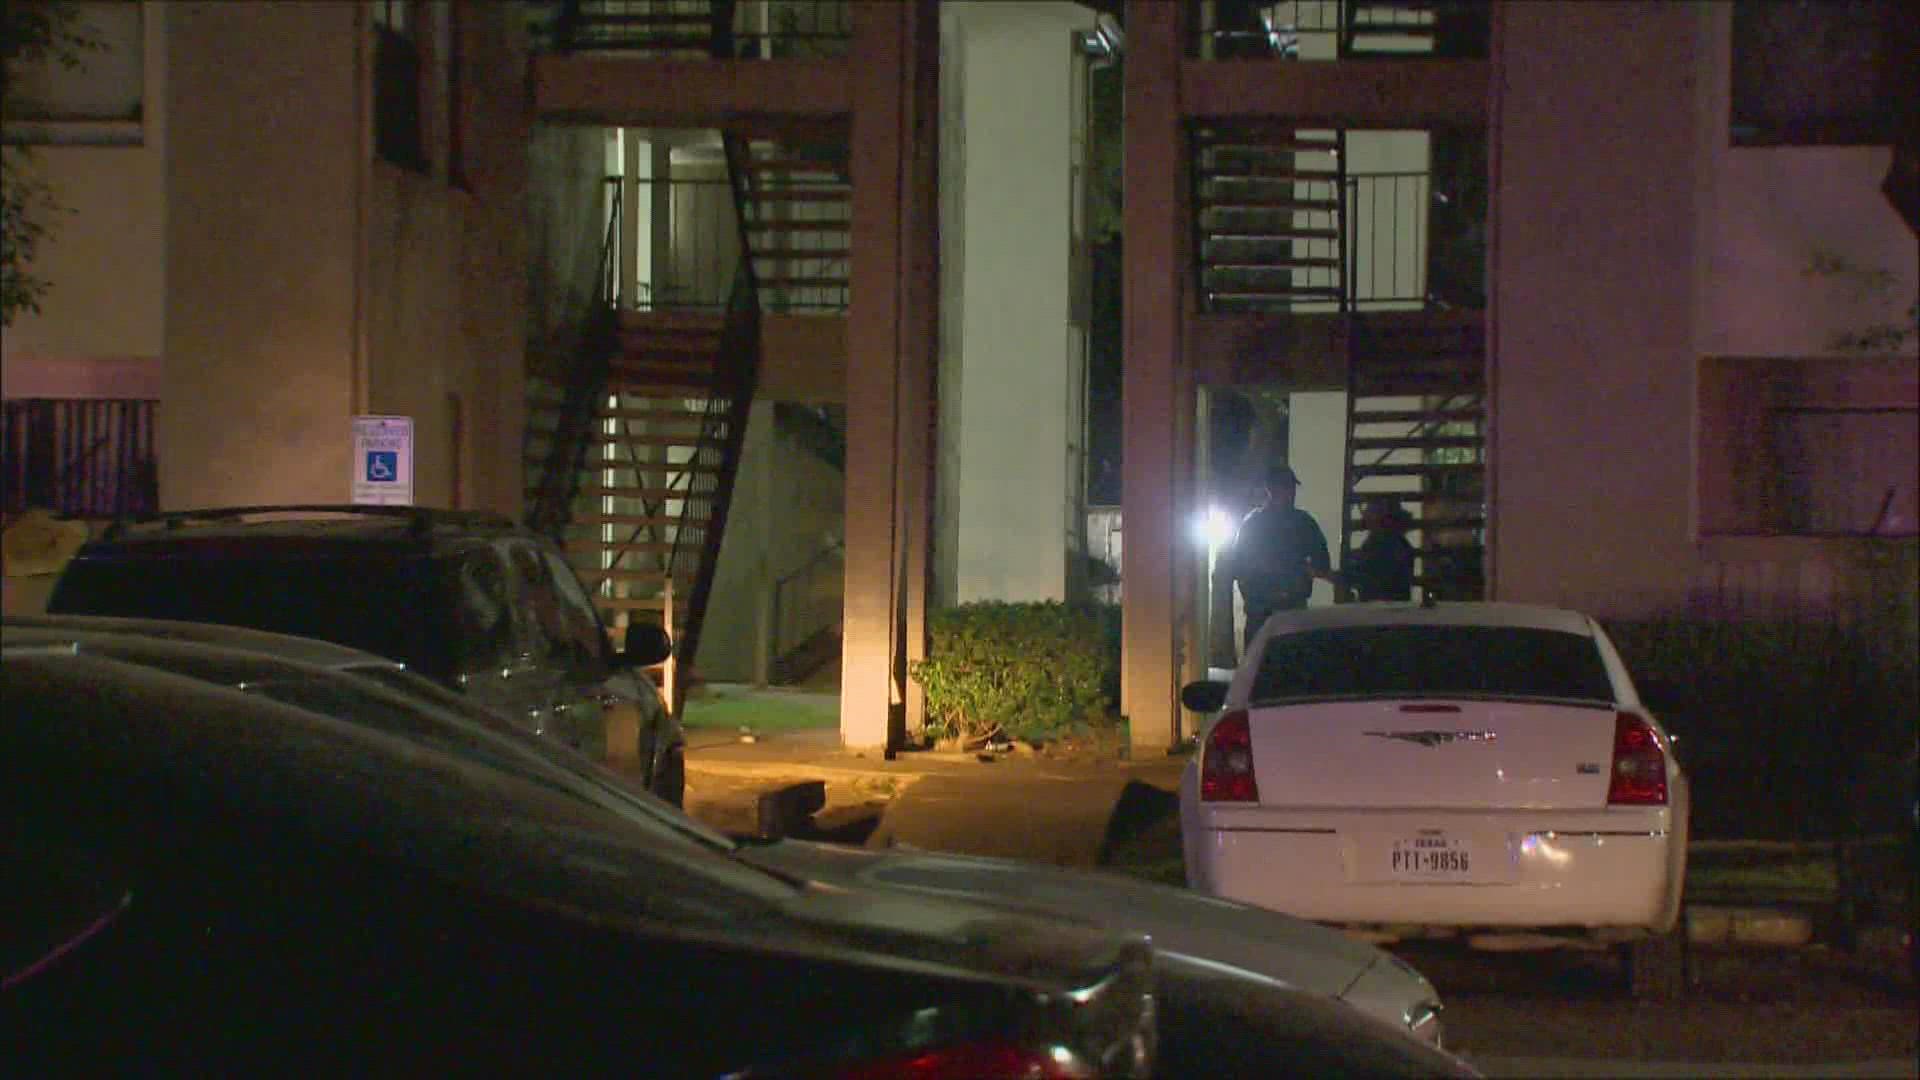 A 14-year-old girl was fatally shot early Monday morning at an apartment complex in Dallas, police said.